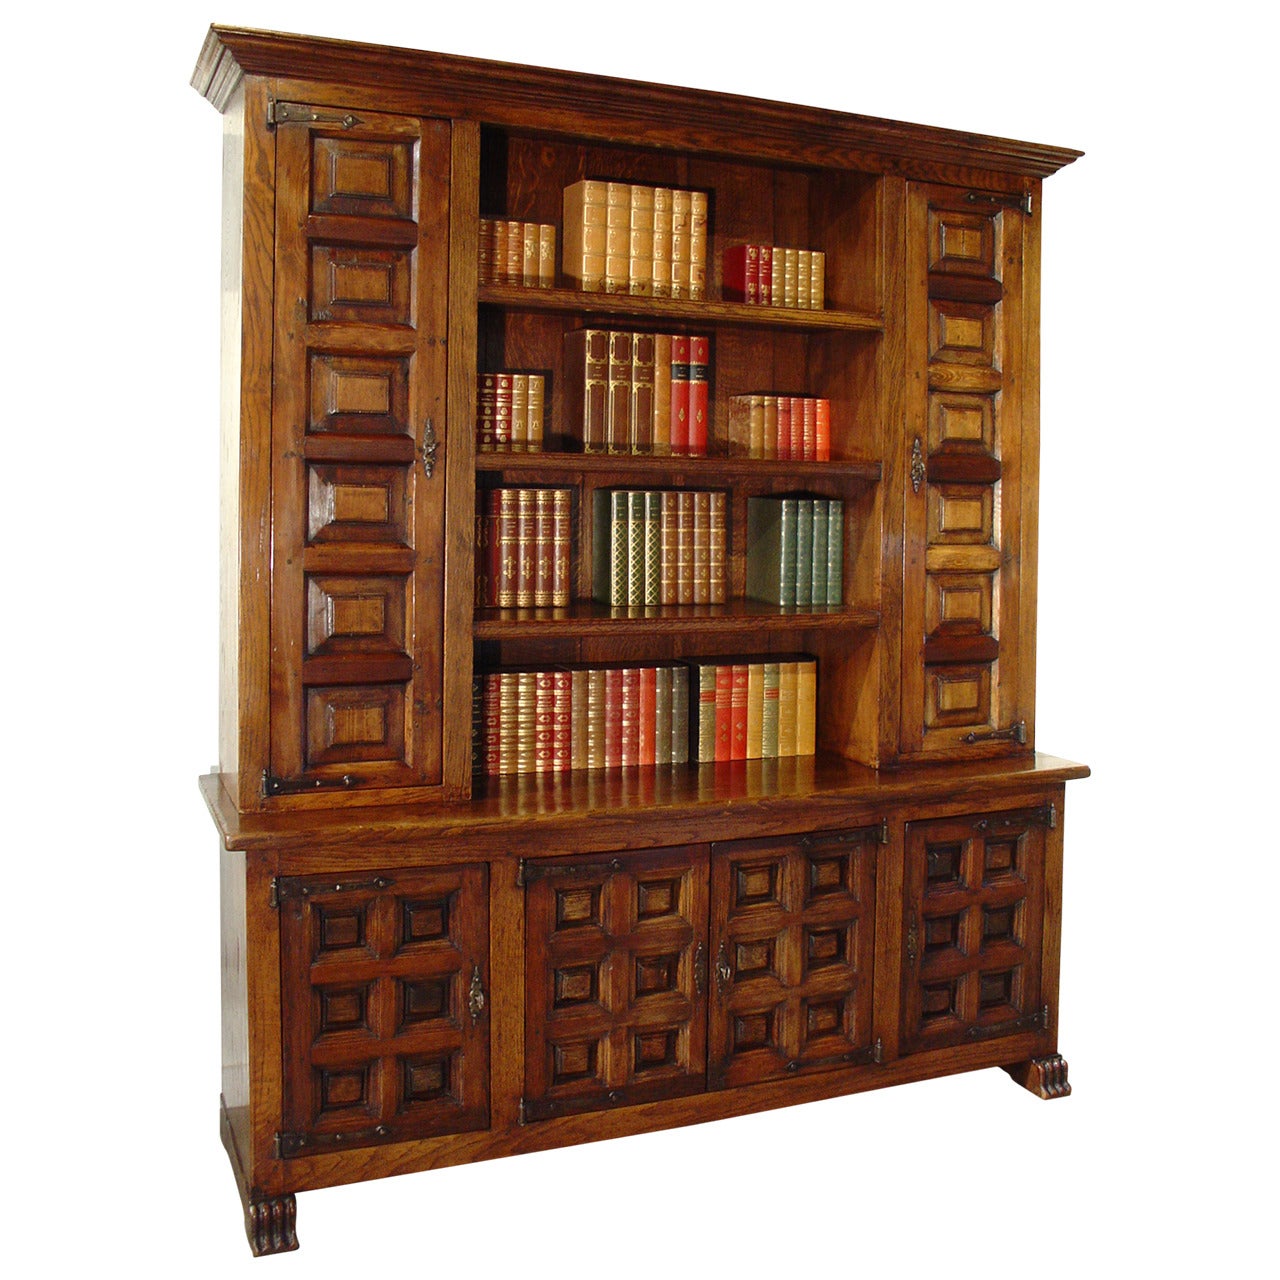 Large Oak Bookcase with Iron Hardware from Spain, Early 1900s